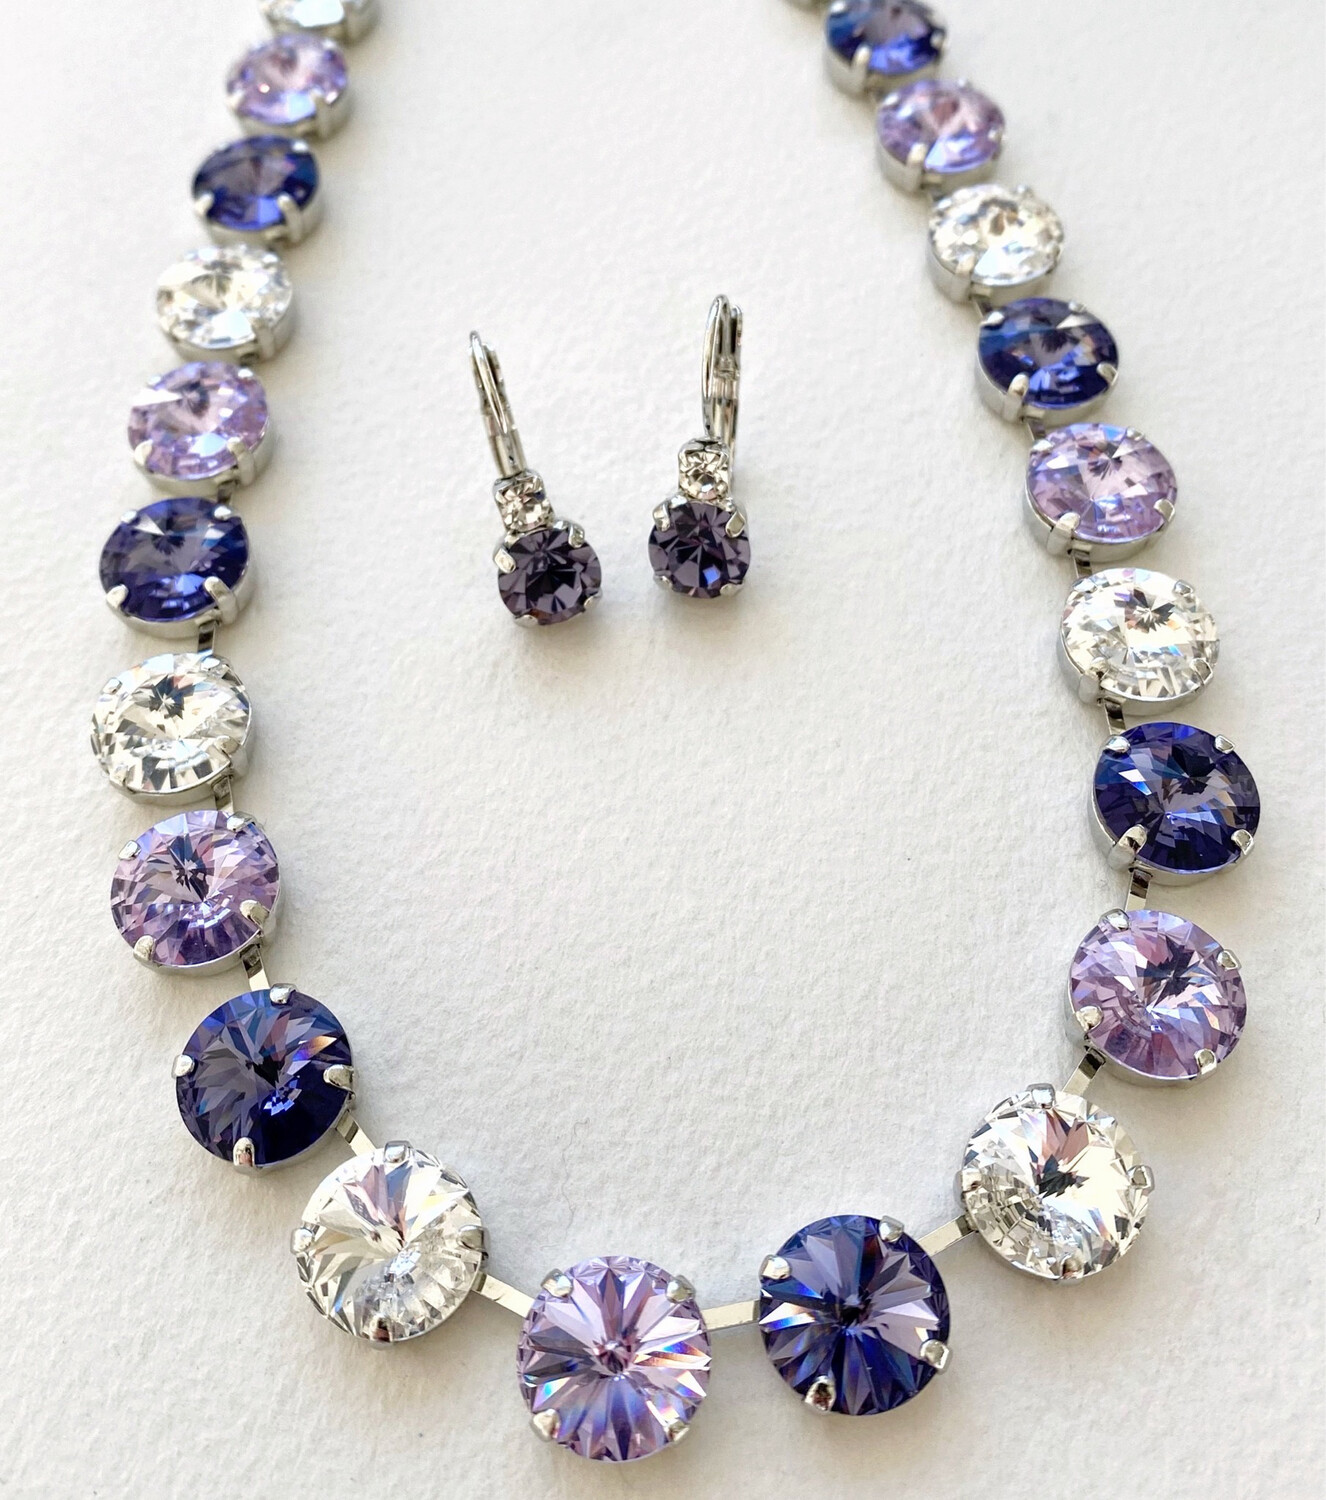 Tanzanite and Violet Crystal Necklace